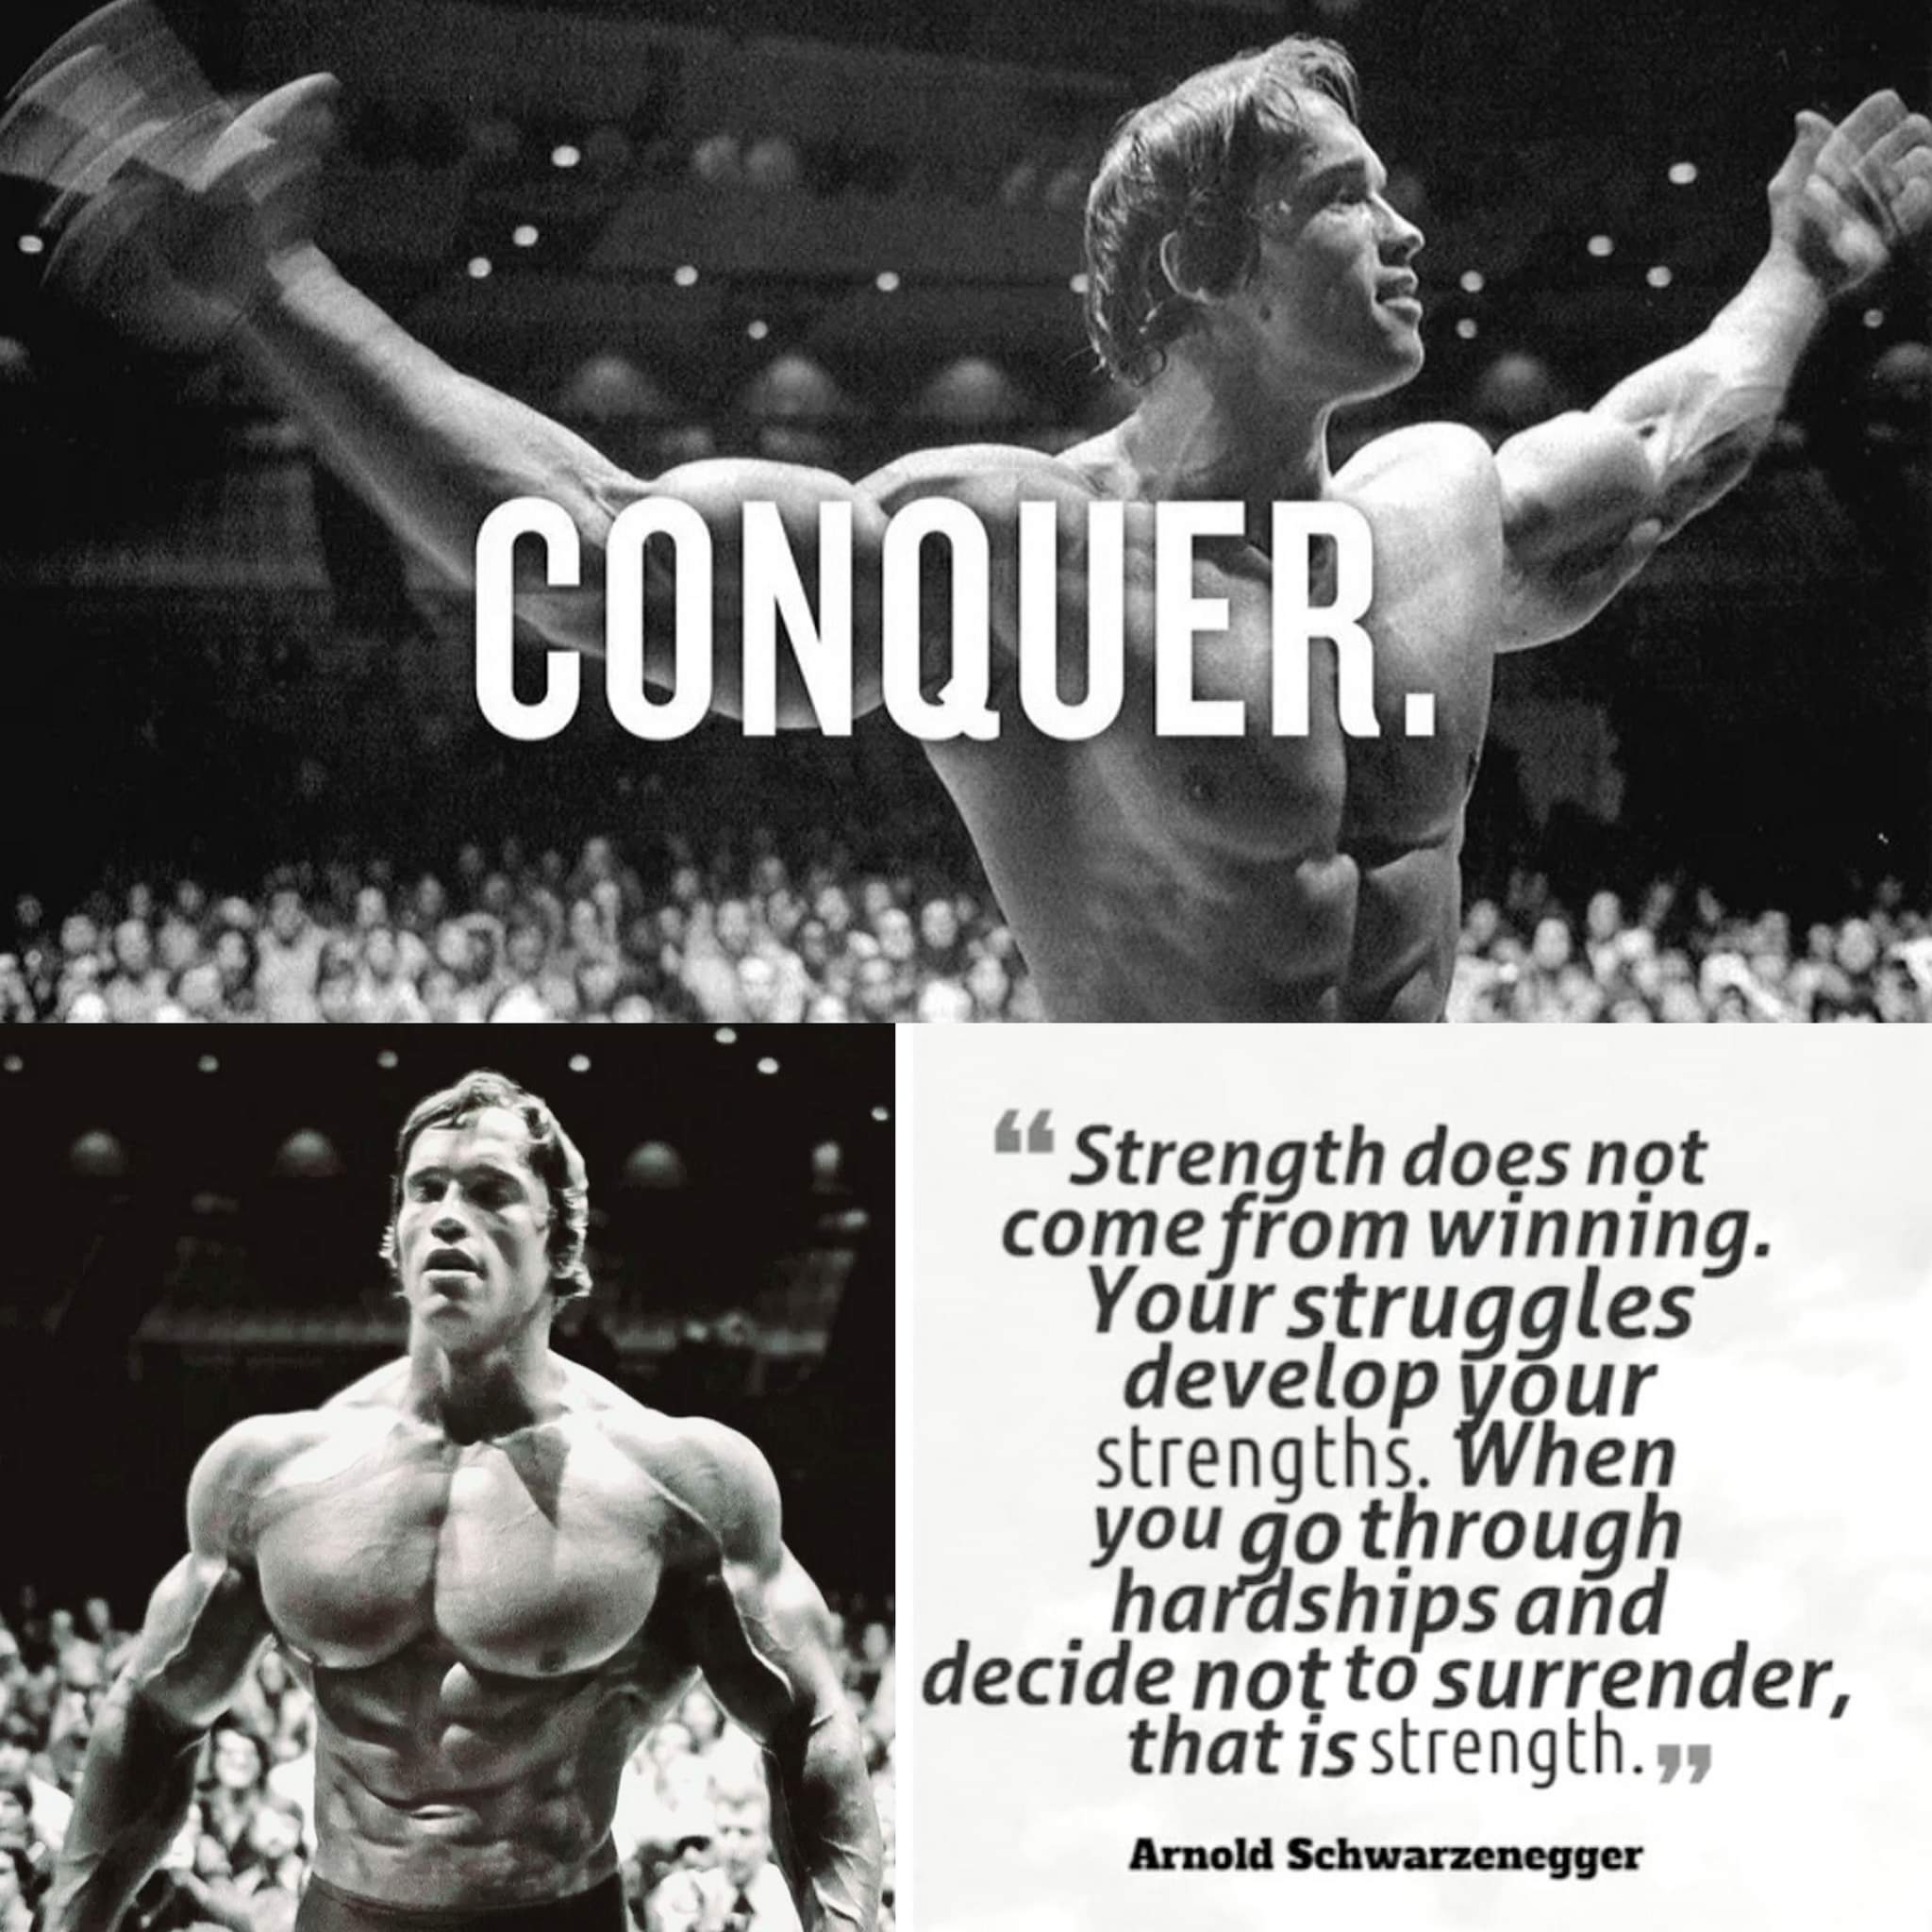 bodybuilding motivation " strength does not come from winning. yout struggles develop your strengths. when you go through hardships and decide not to surrender, that is strength. "